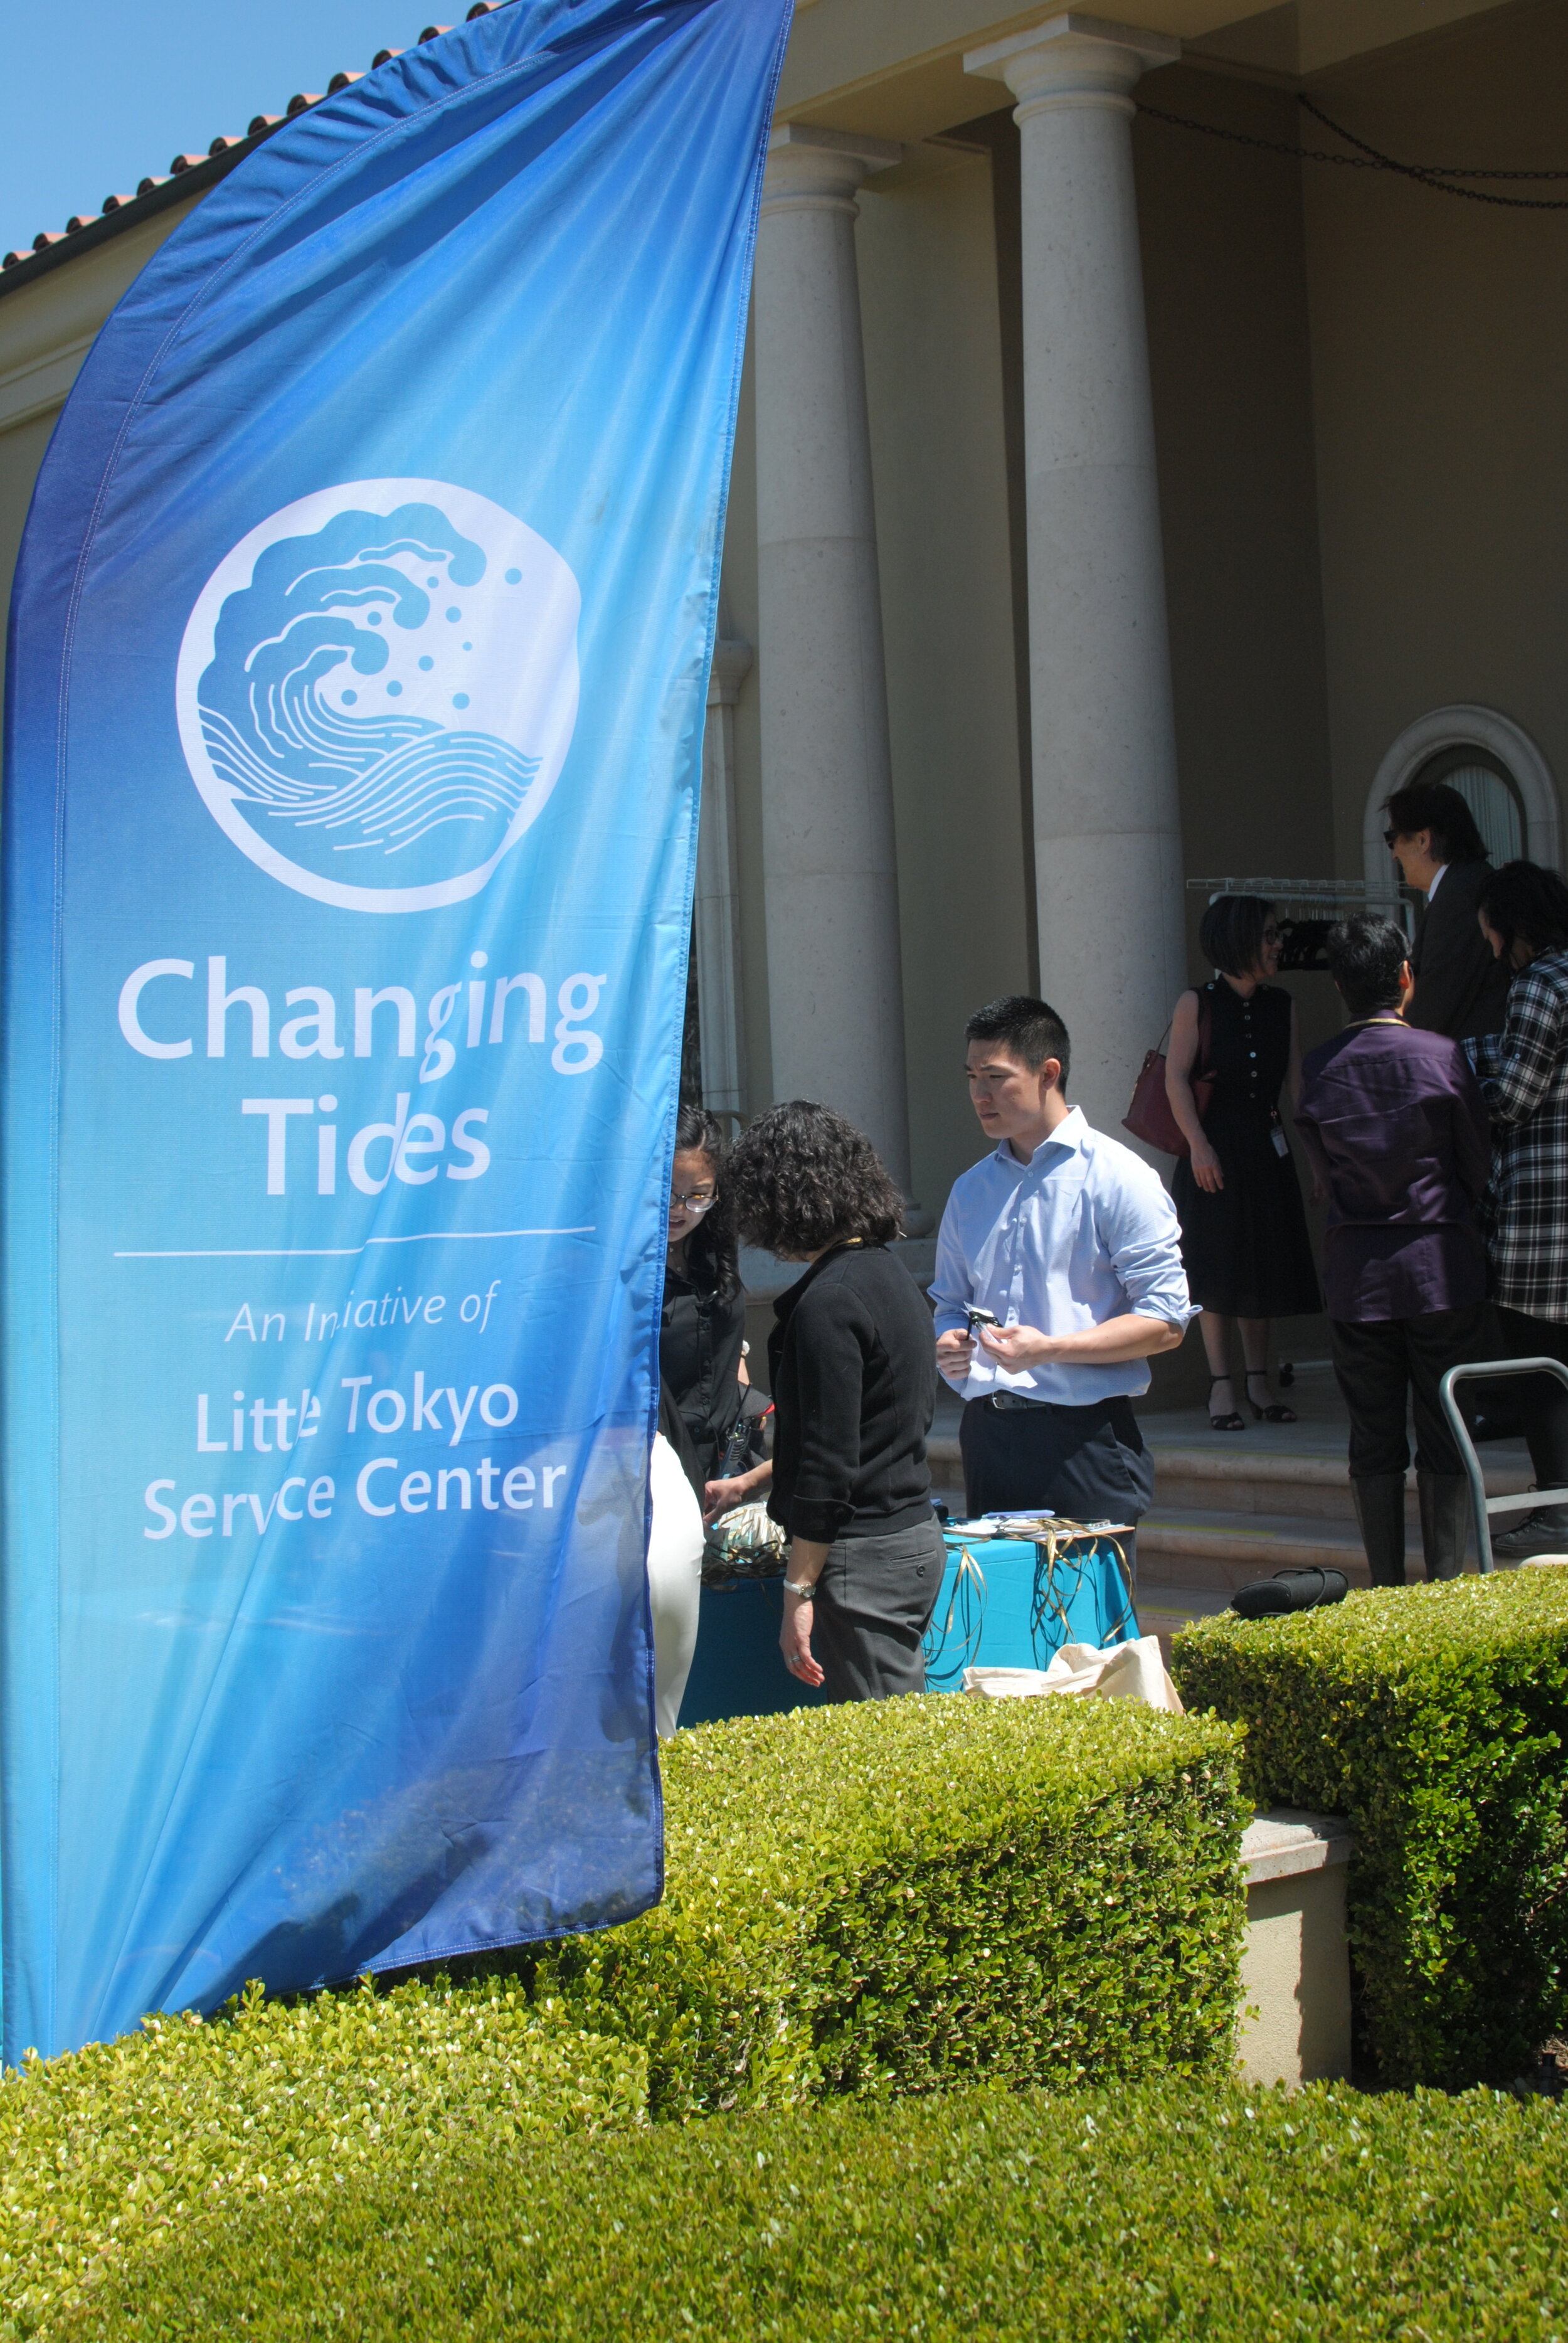 People stand at a table behind a banner that reads “Changing Tides: An Initiative of Little Tokyo Service Center.”